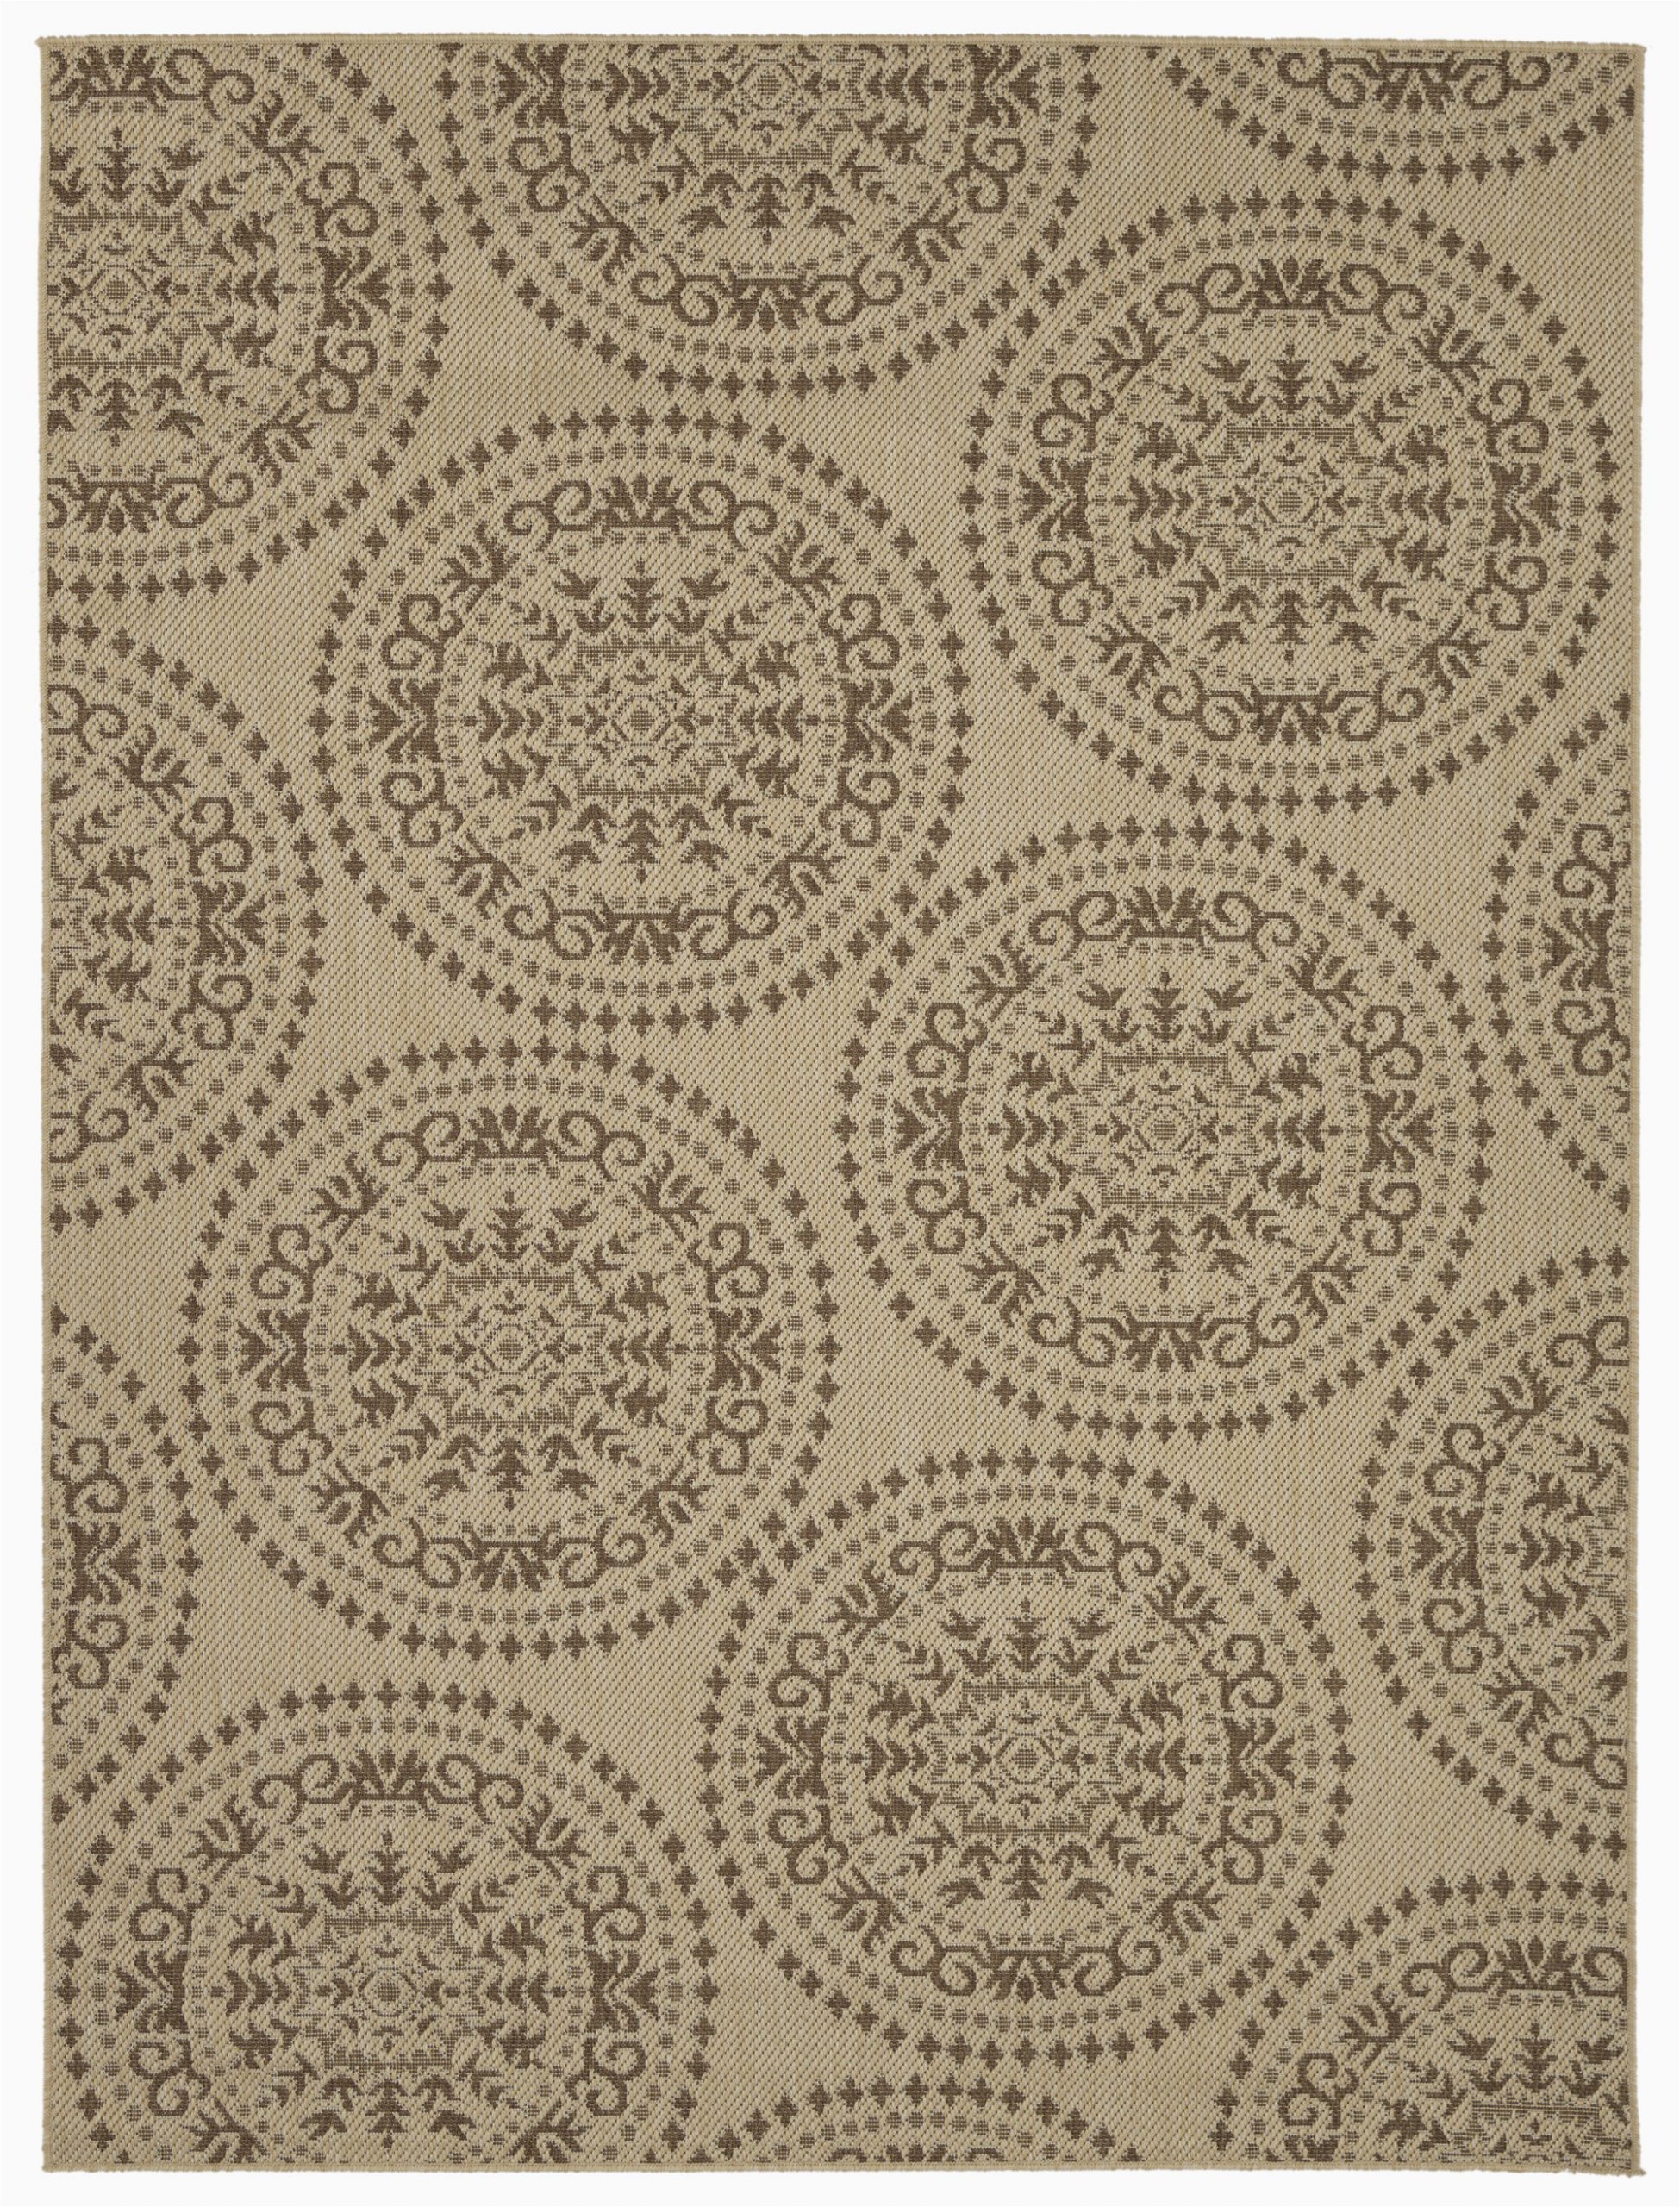 Area Rugs with soft Backing Genoa Damask Medallions Beige Indoor Outdoor area Rug